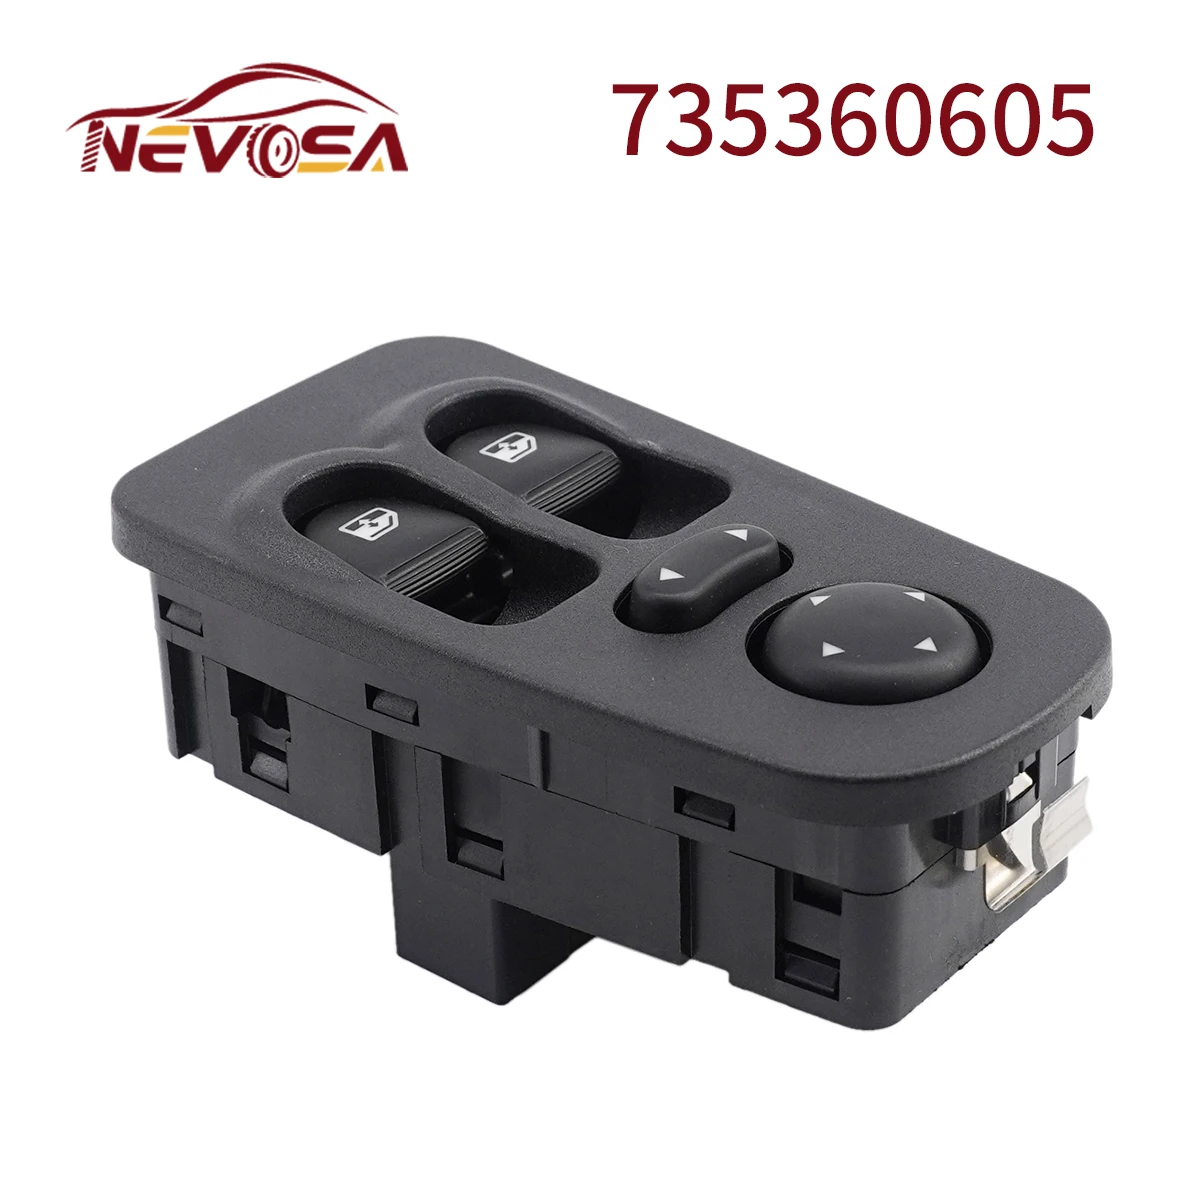 

For Fiat Lancia Ypsilon 2003-2011 735360605 New Front Right Power Window Control Switch Button 735346366 16 Pins Parts 735346367